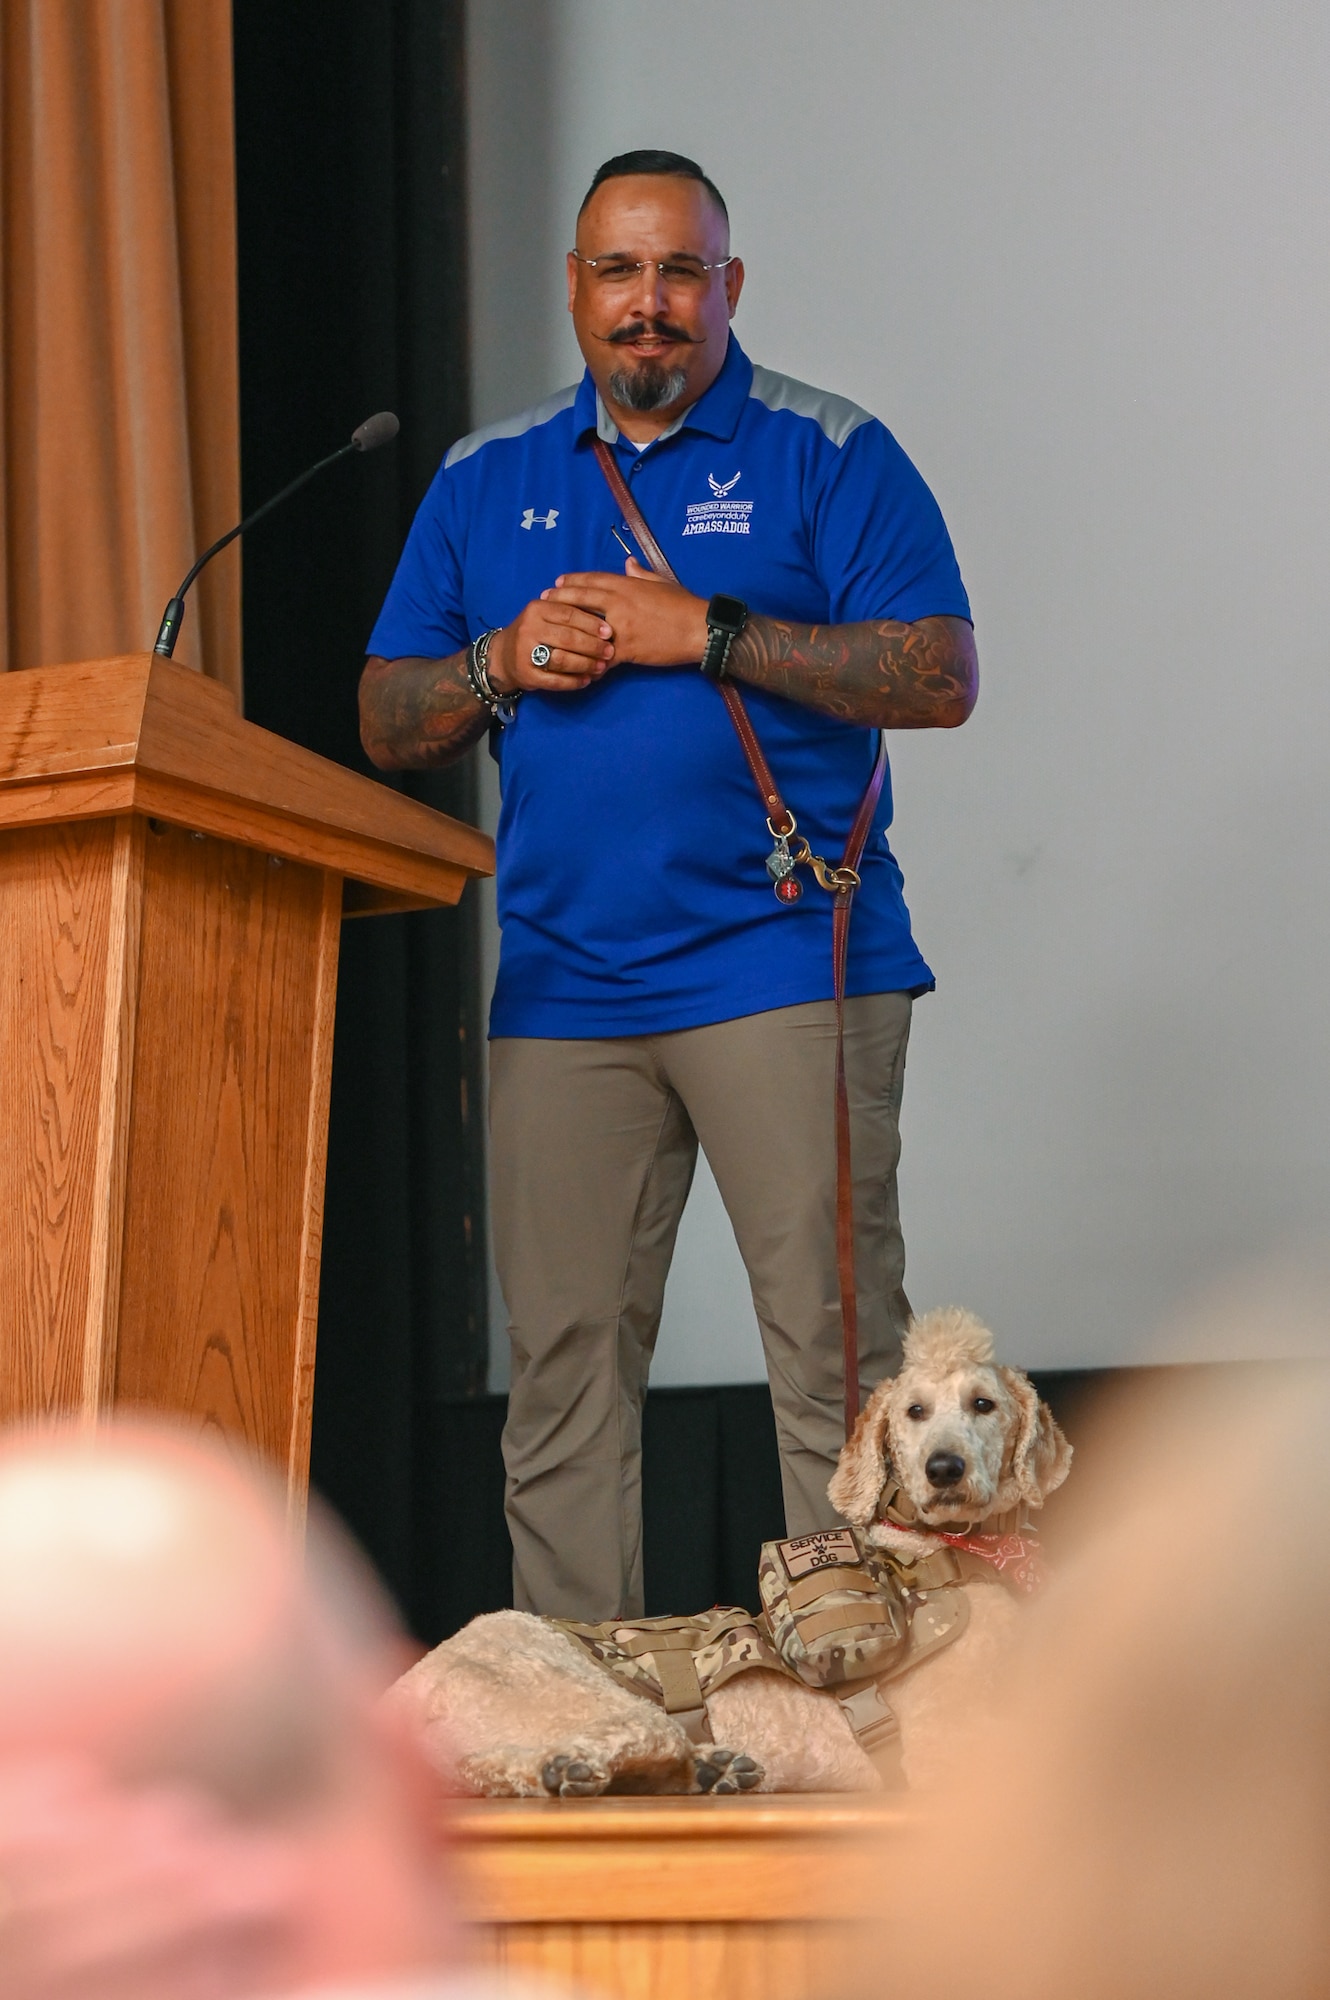 Master Sgt. Jose Rijos, senior noncommissioned officer in charge of domestic operations, Massachusetts Air National Guard and Wounded Warrior Ambassador, accompanied by his service dog, Cairo, speaks at the Hanscom Air Force Base theater, Aug. 22. As an Air Force Wounded Warrior Program ambassador, Rijos shared his personal story of post-traumatic stress disorder and the steps he took to recovery. (U.S. Air Force photo by Mark Herlihy)